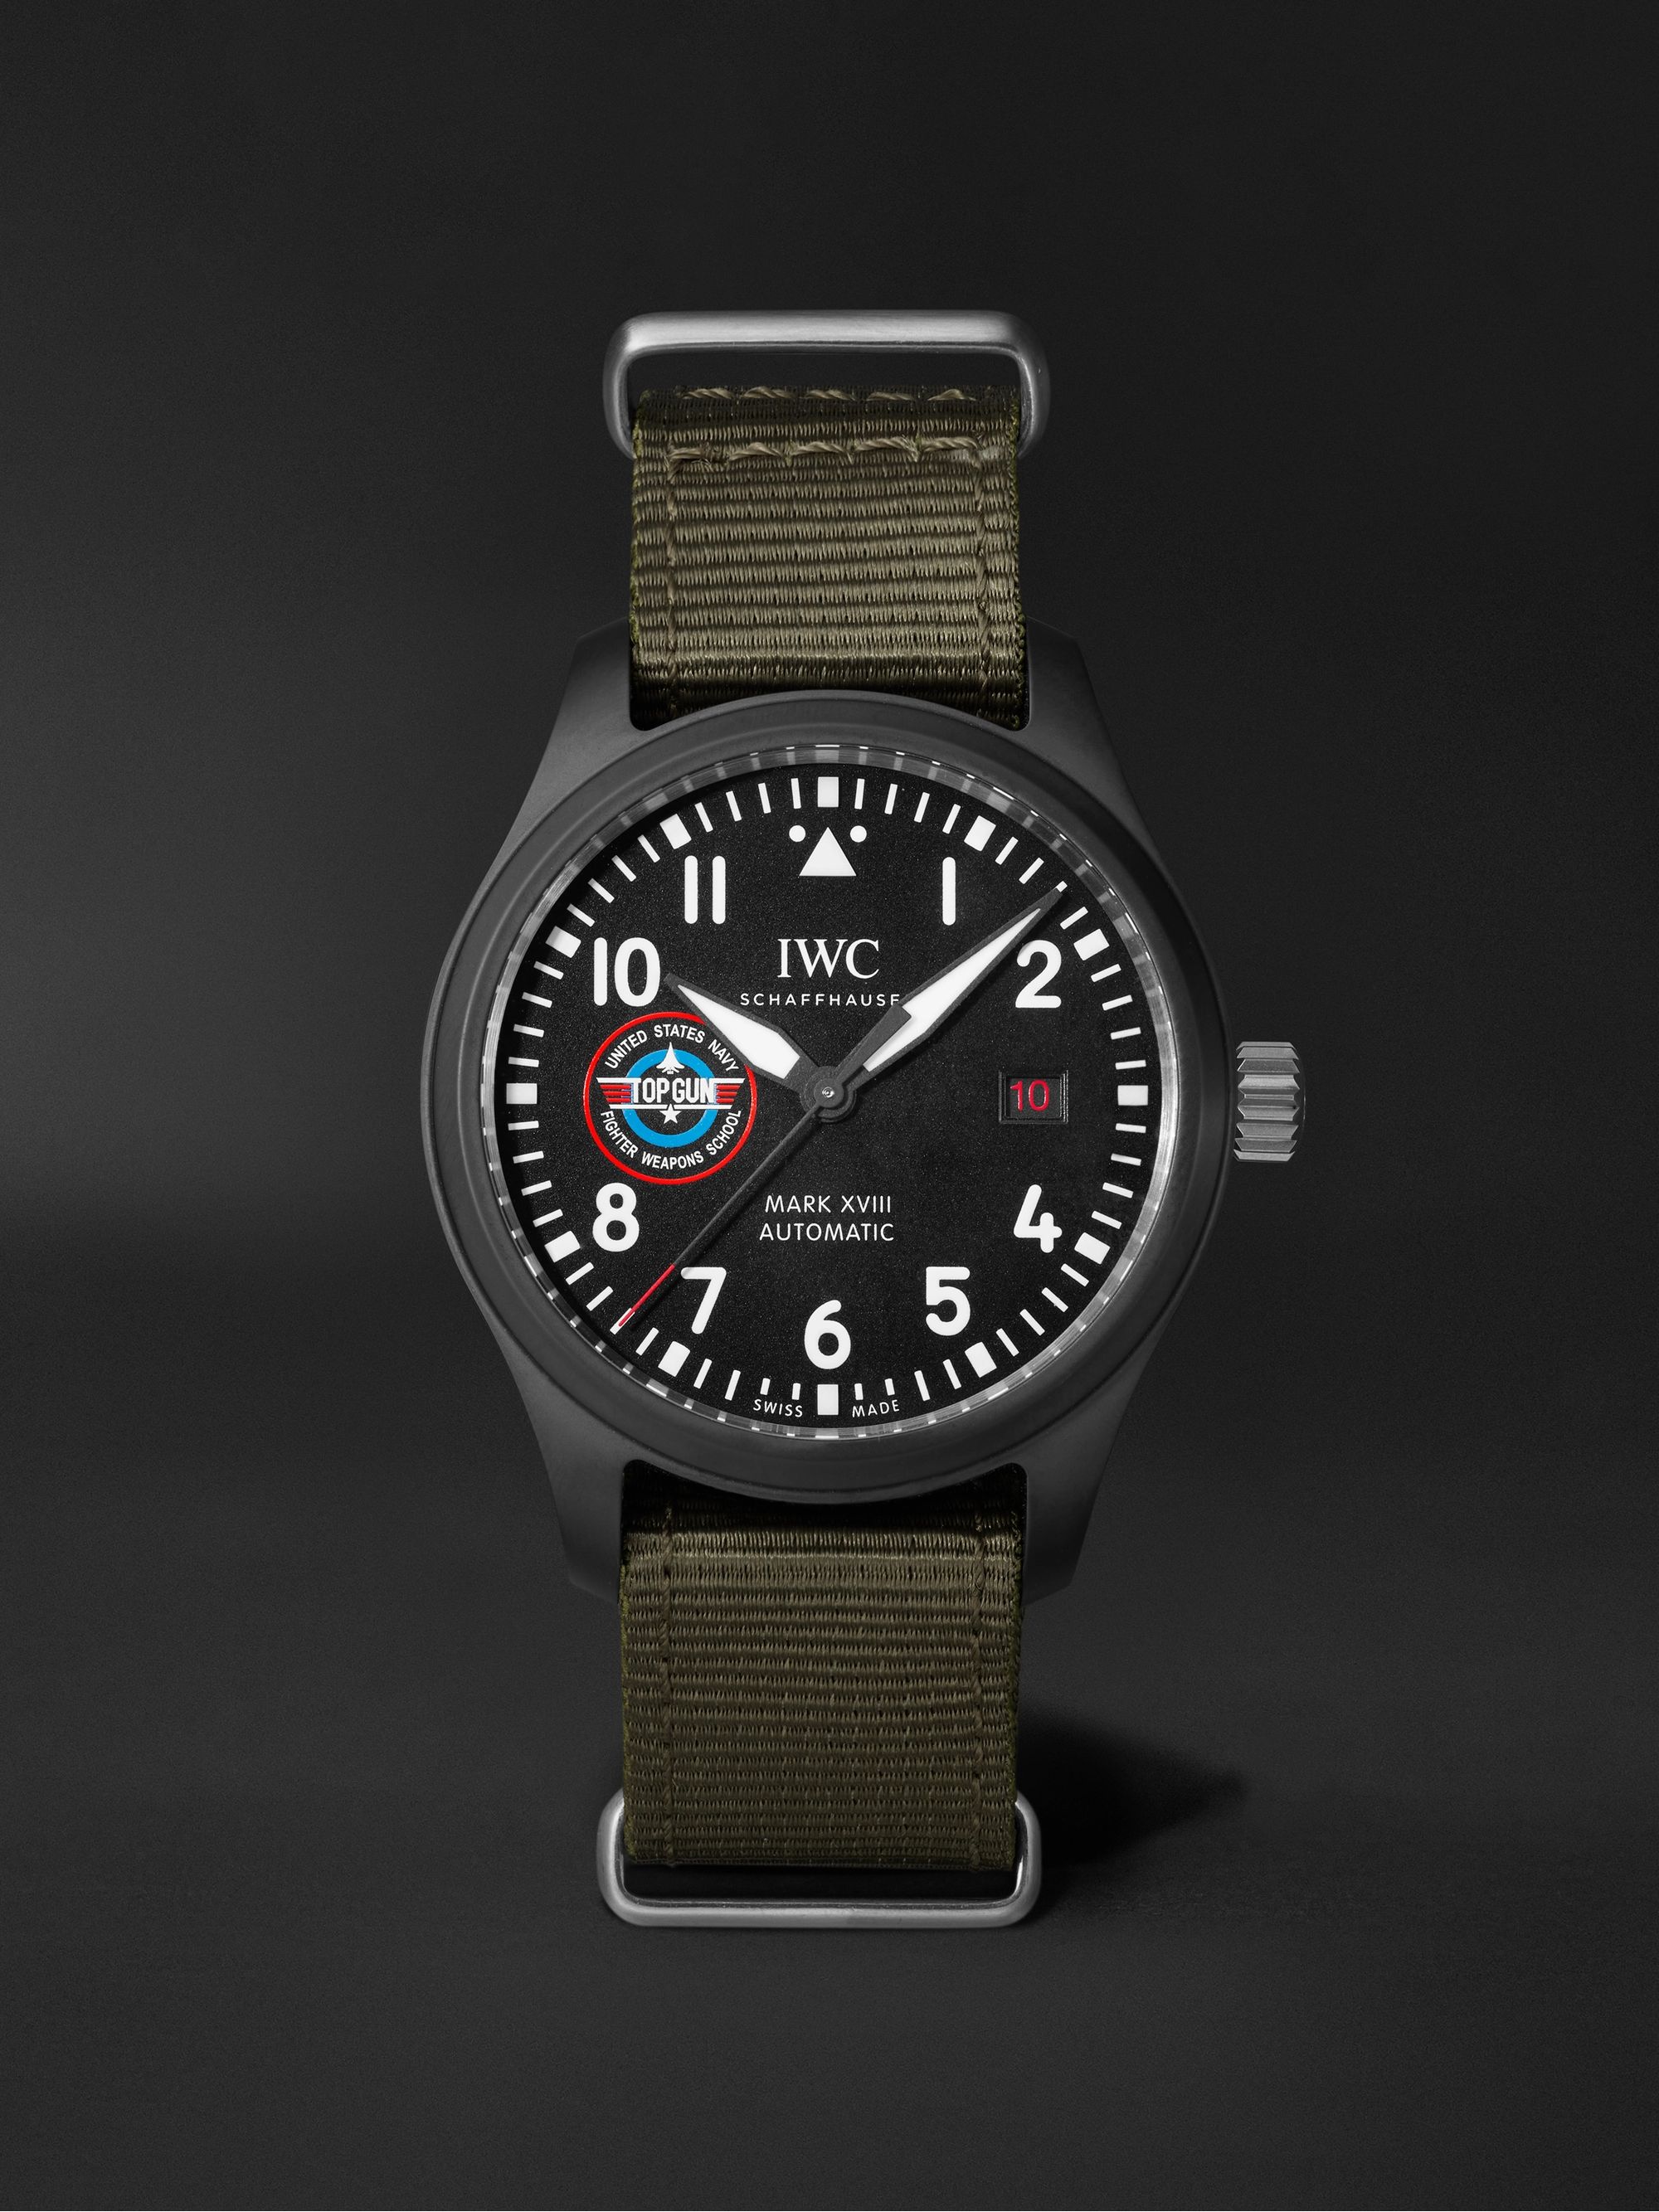 IWC SCHAFFHAUSEN Pilot's Mark XVIII Top Gun Edition 'SFTI' Limited Edition  Automatic 41mm Ceramic and Textile Watch with Stopwatch, Ref. No. IW324711  | MR PORTER